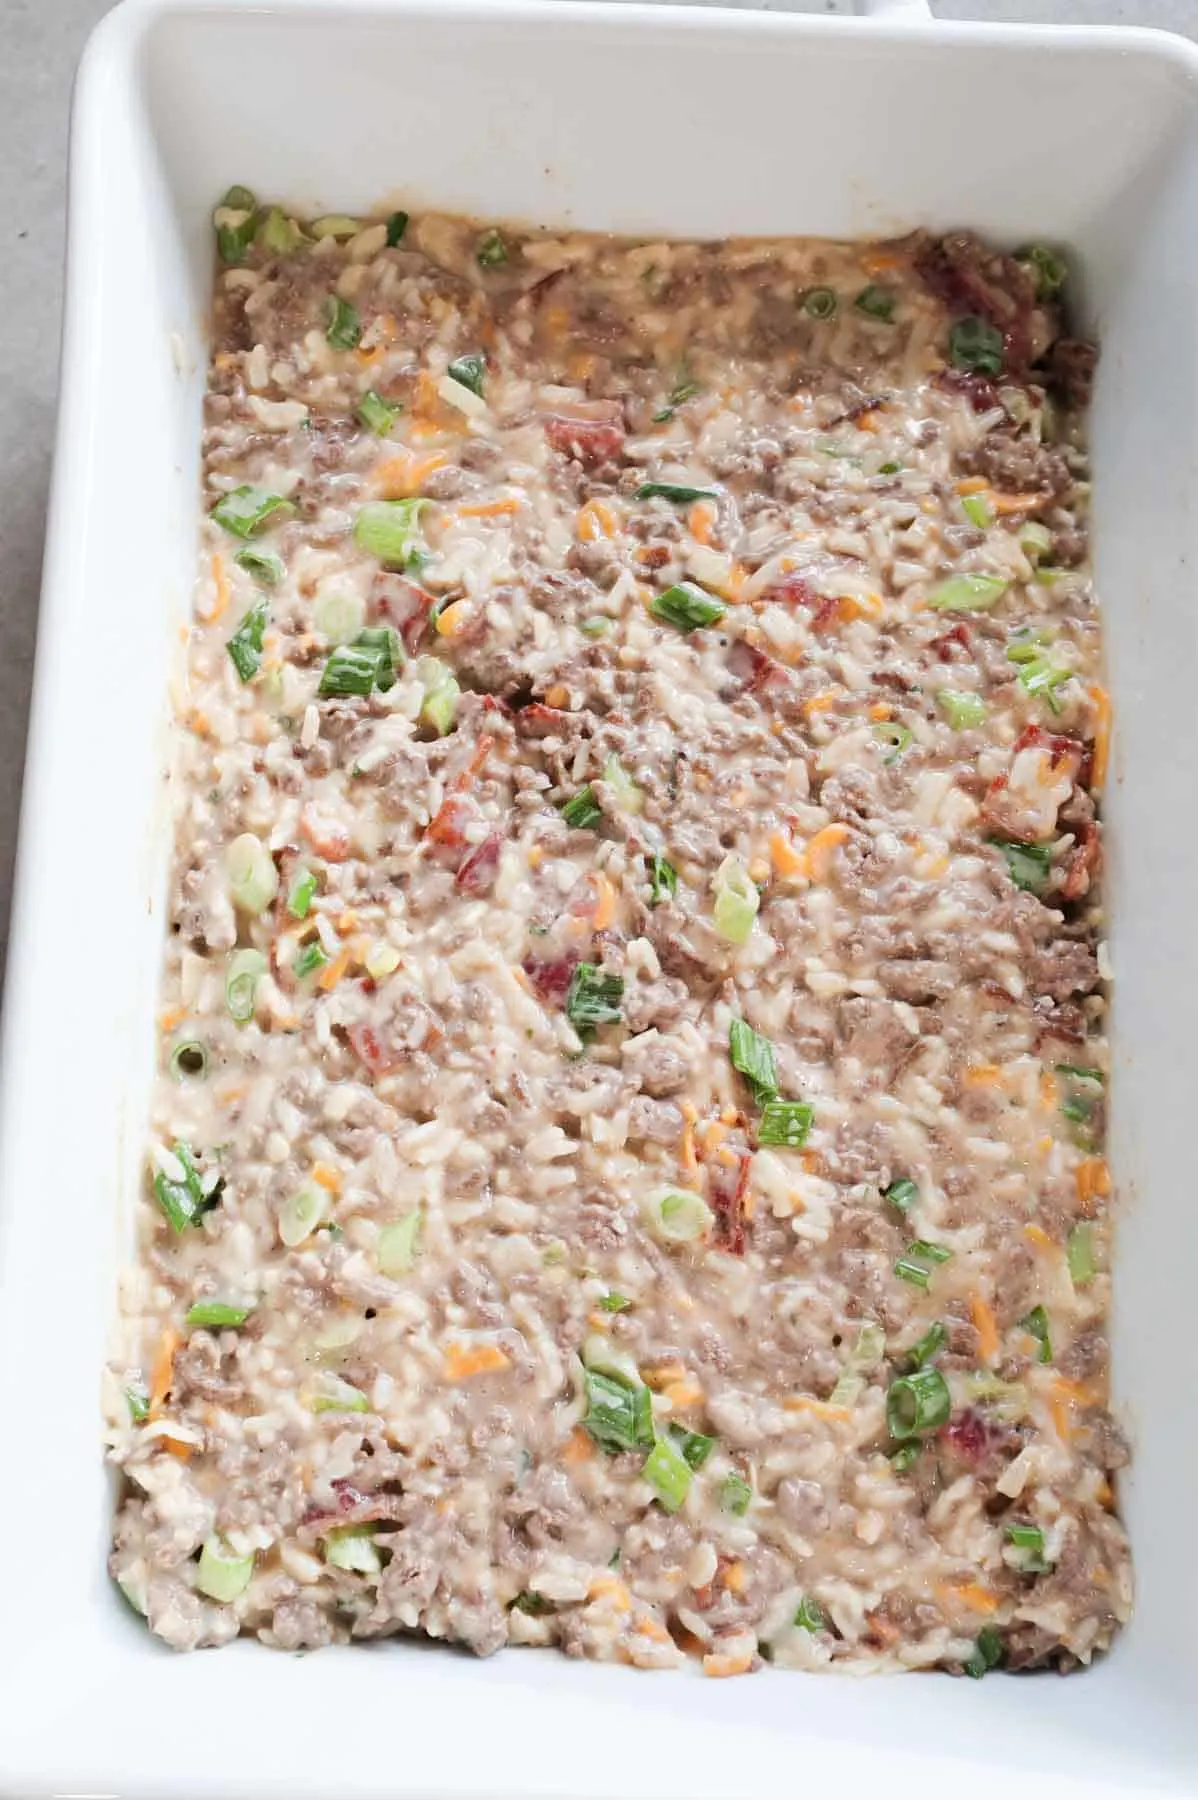 creamy ground beef and rice mixture in a baking dish